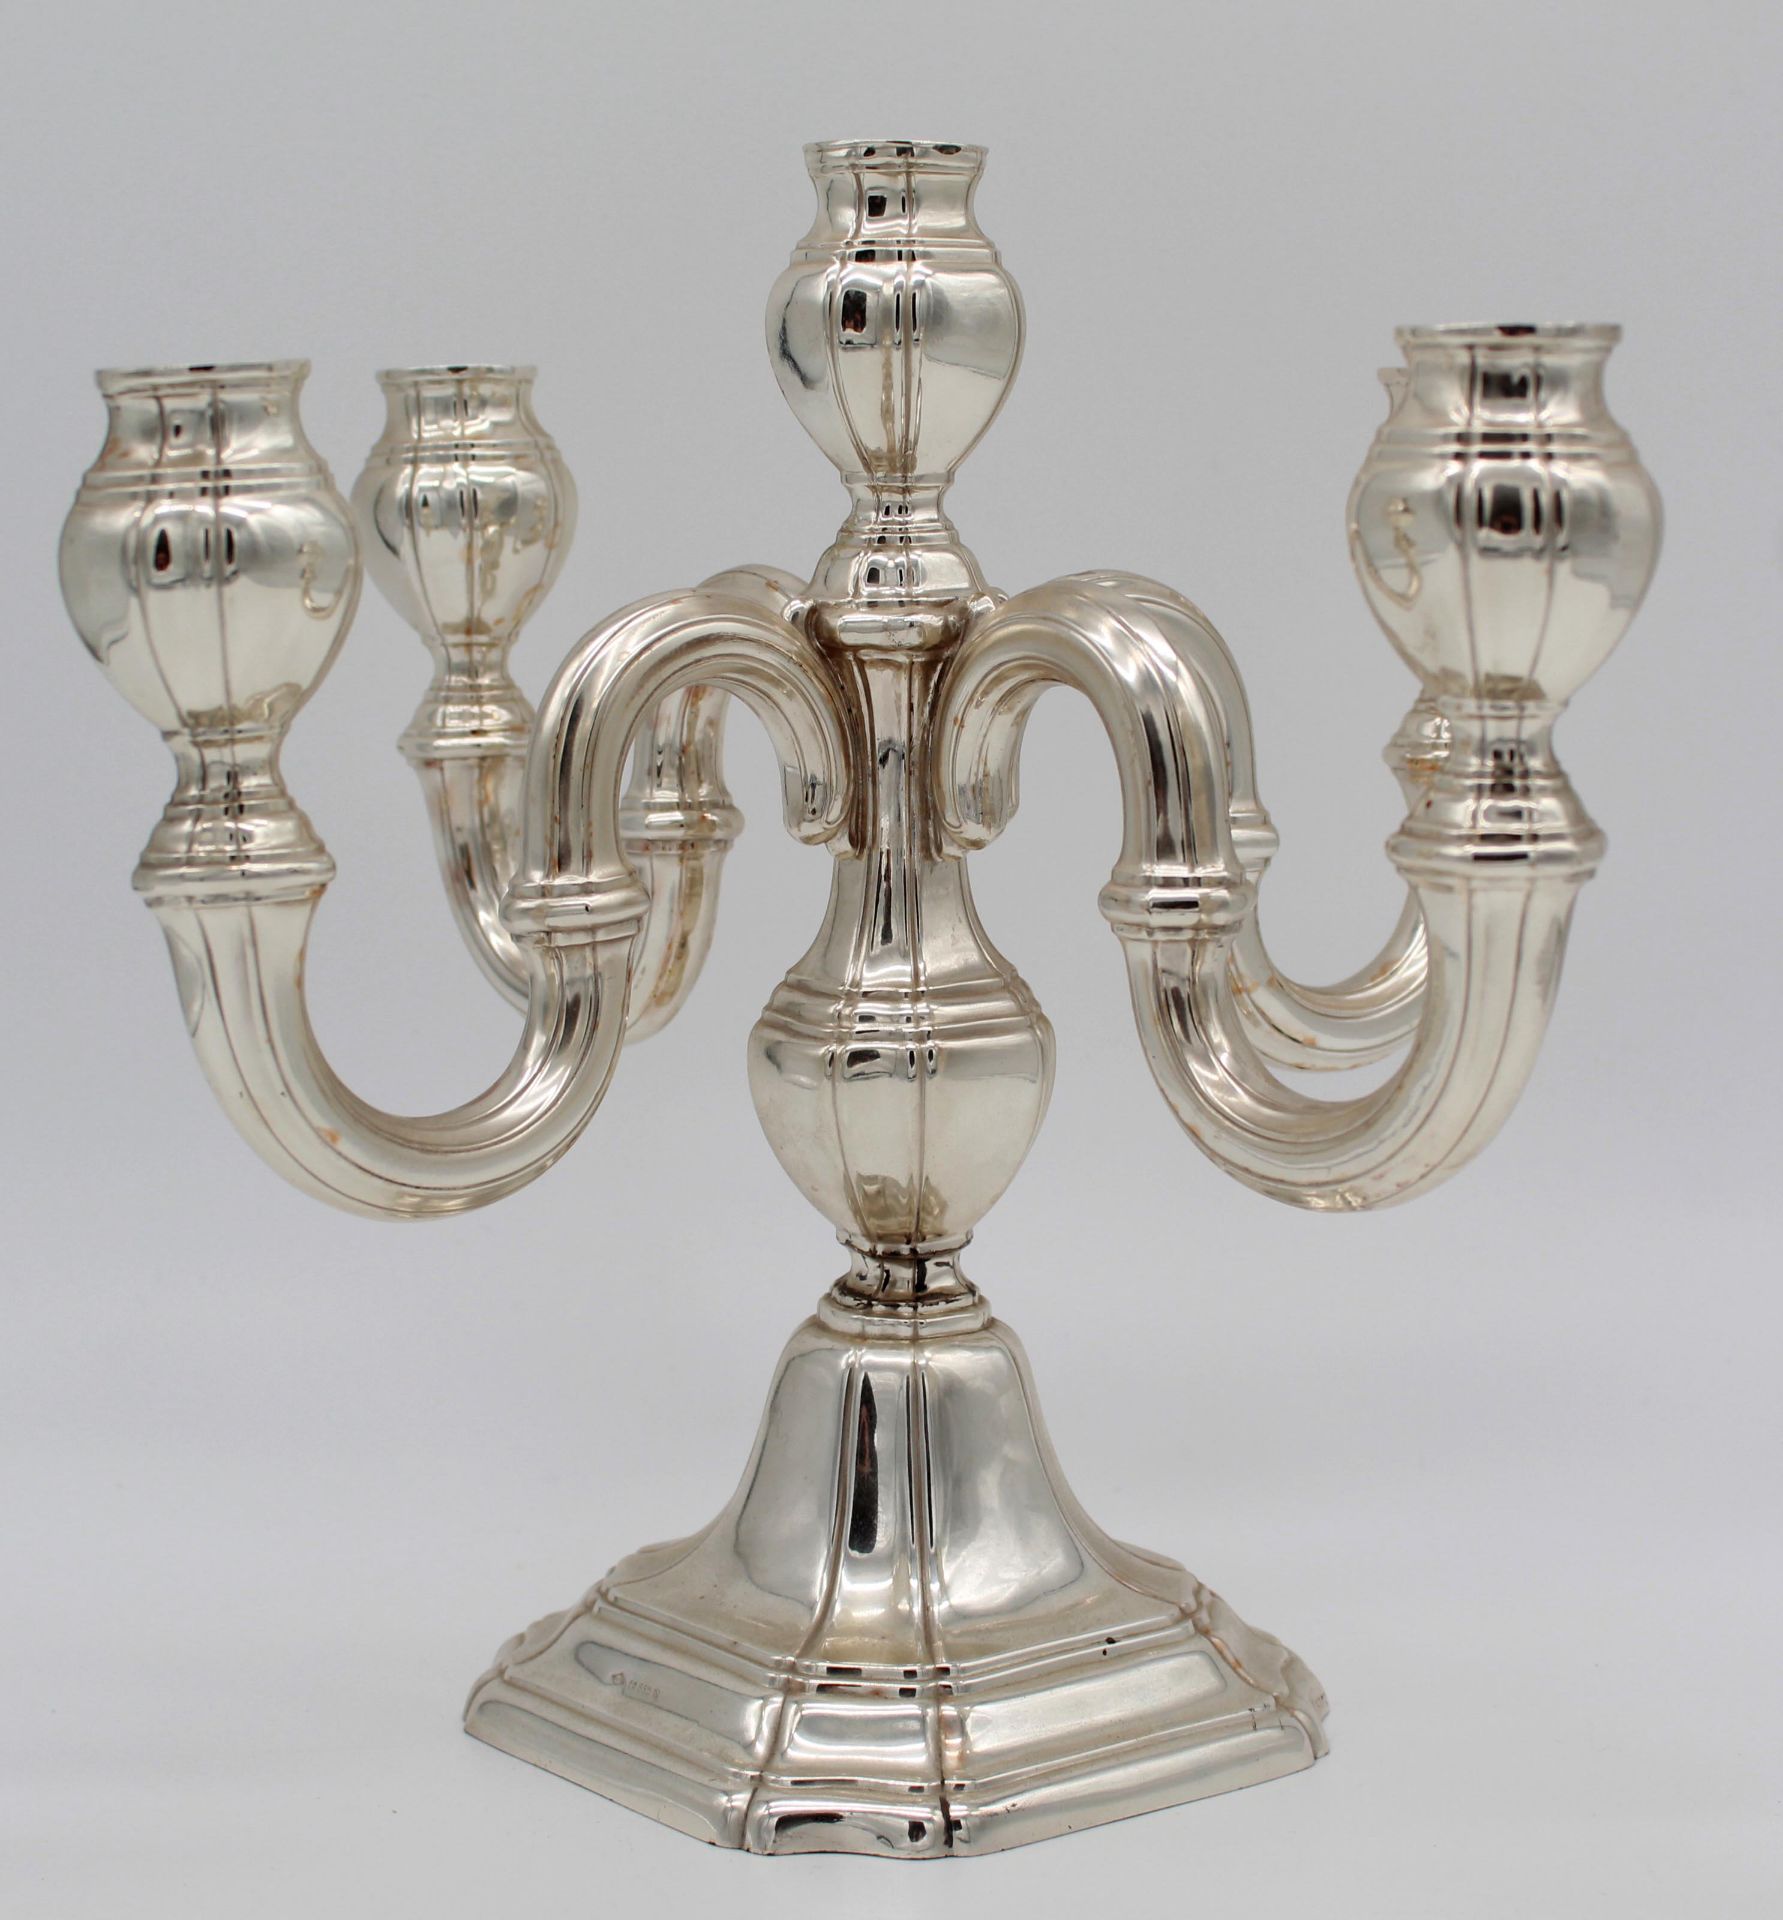 835 silver. Five-lamp candlestick. - Image 3 of 8